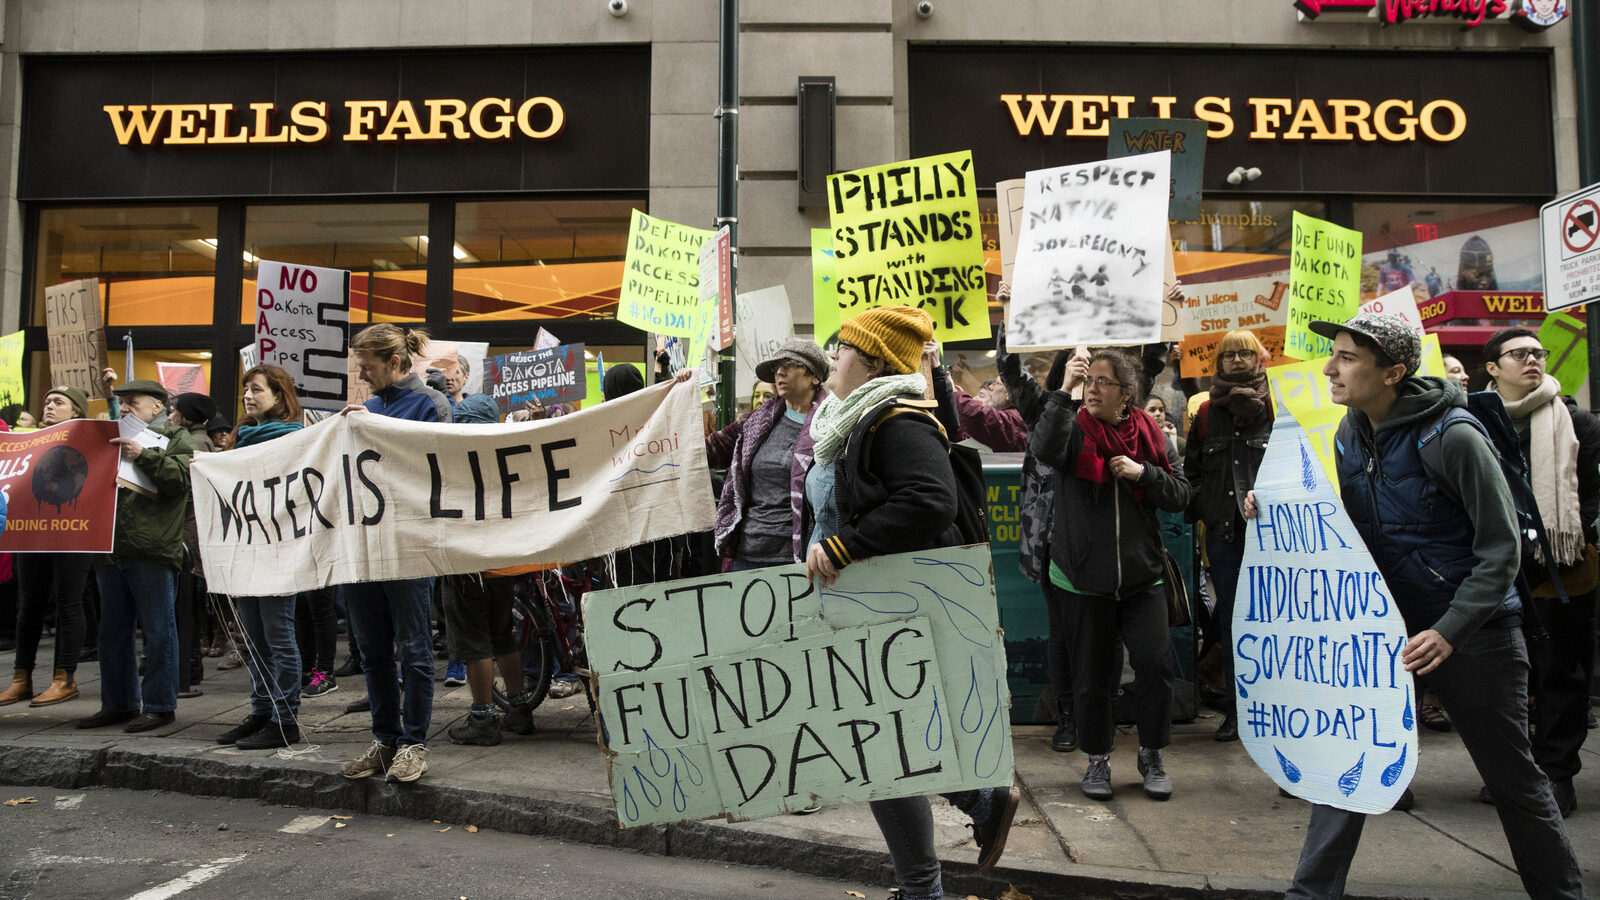 Protesters demonstrate in solidarity with members of the Standing Rock Sioux tribe in North Dakota over the construction of the Dakota Access oil pipeline, in Philadelphia, Tuesday, Nov. 15, 2016. (AP Photo/Matt Rourke)